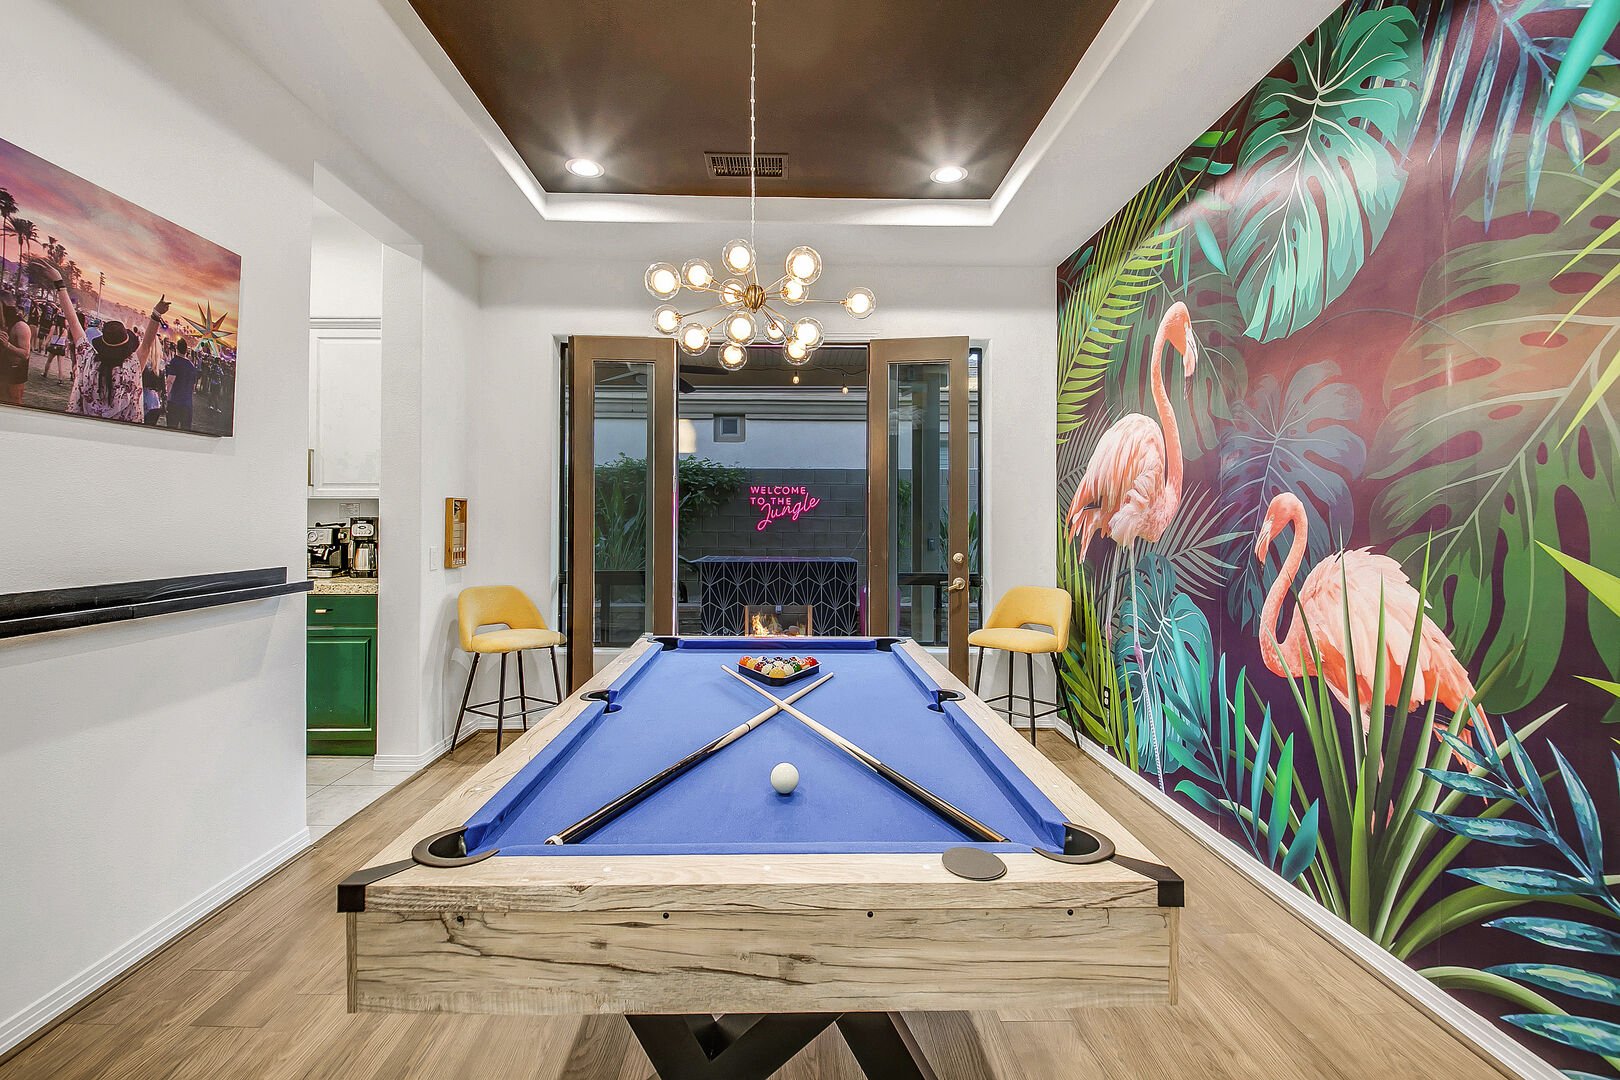 Step into the great game-room and challenge your friends at a game of pool.